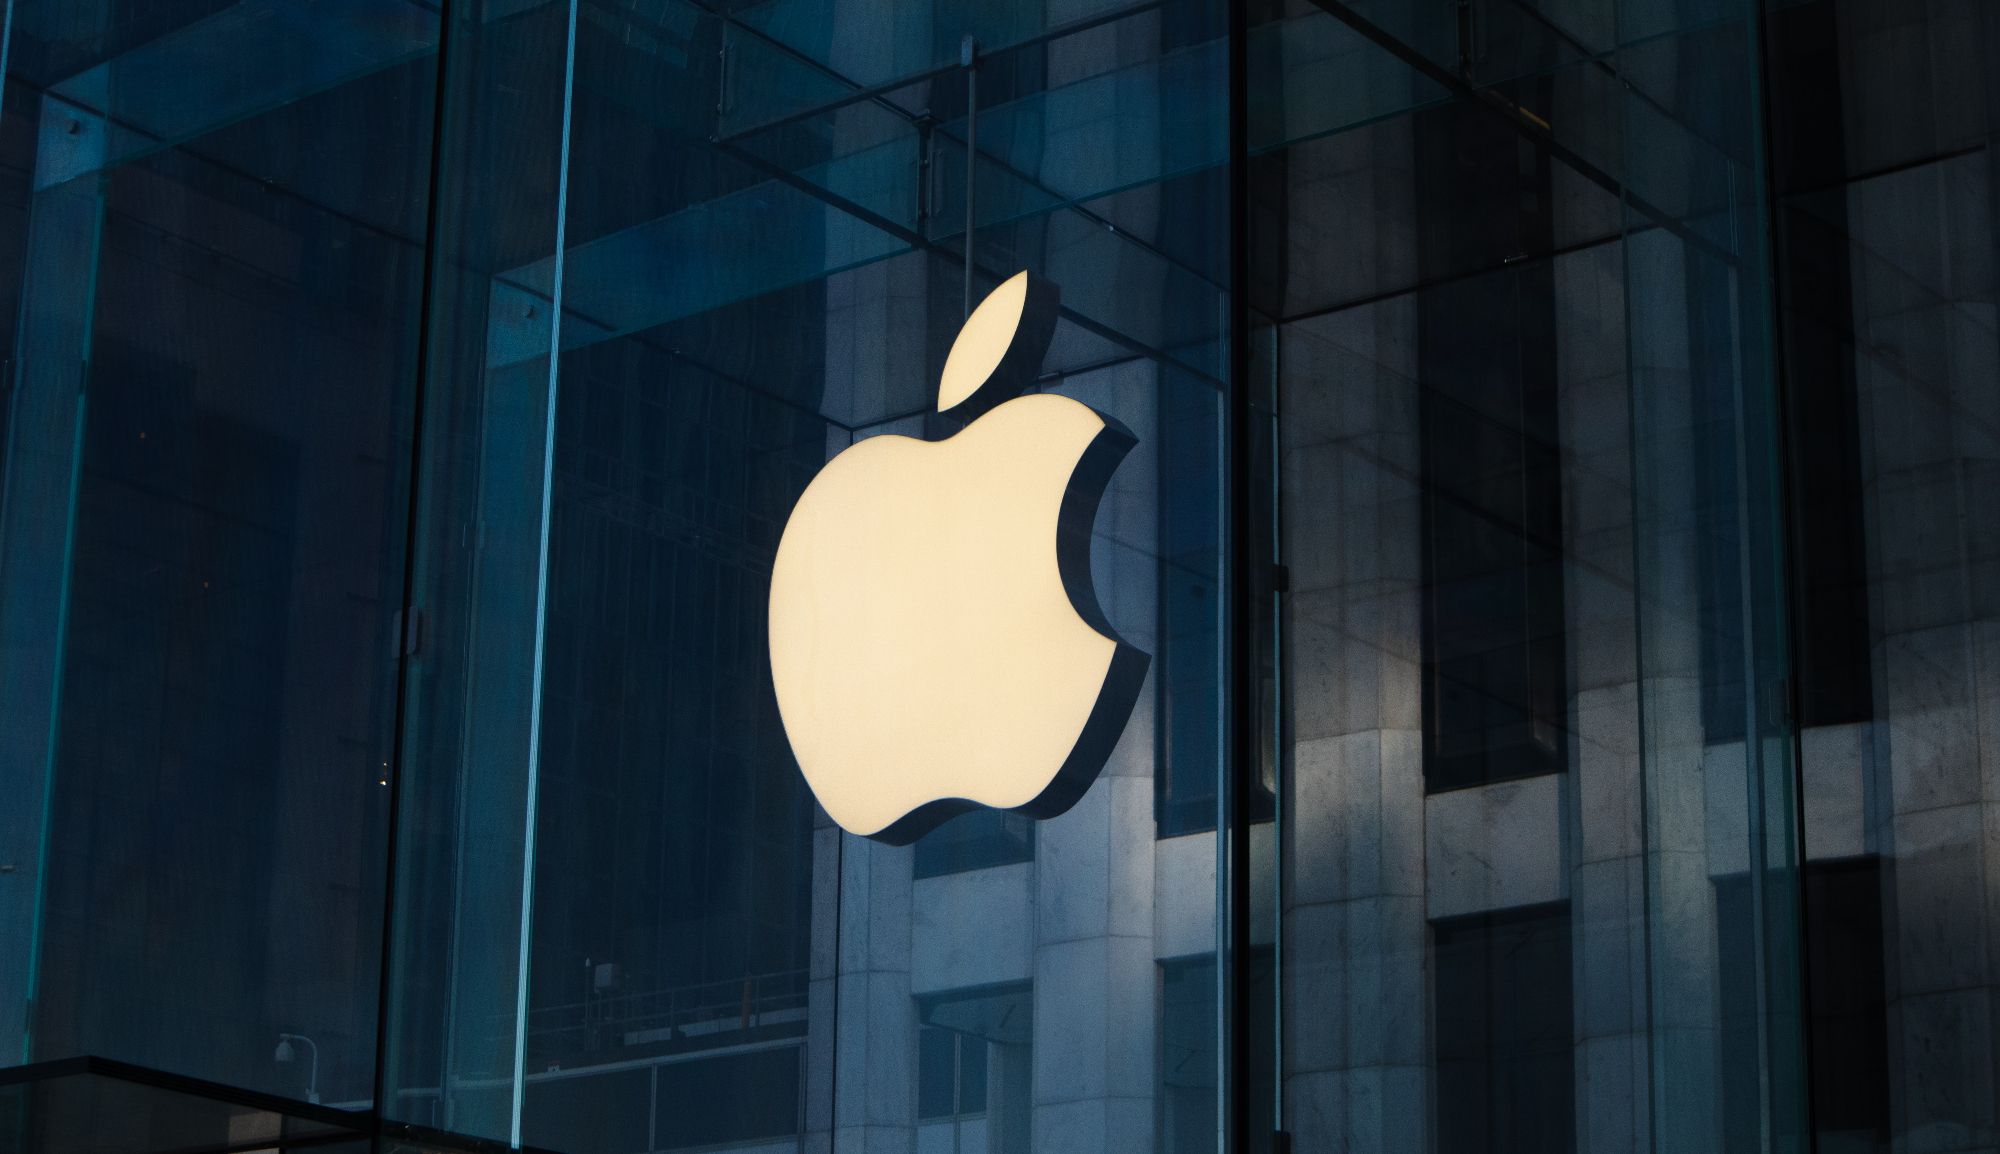 Photo of the front of the building with the Apple logo